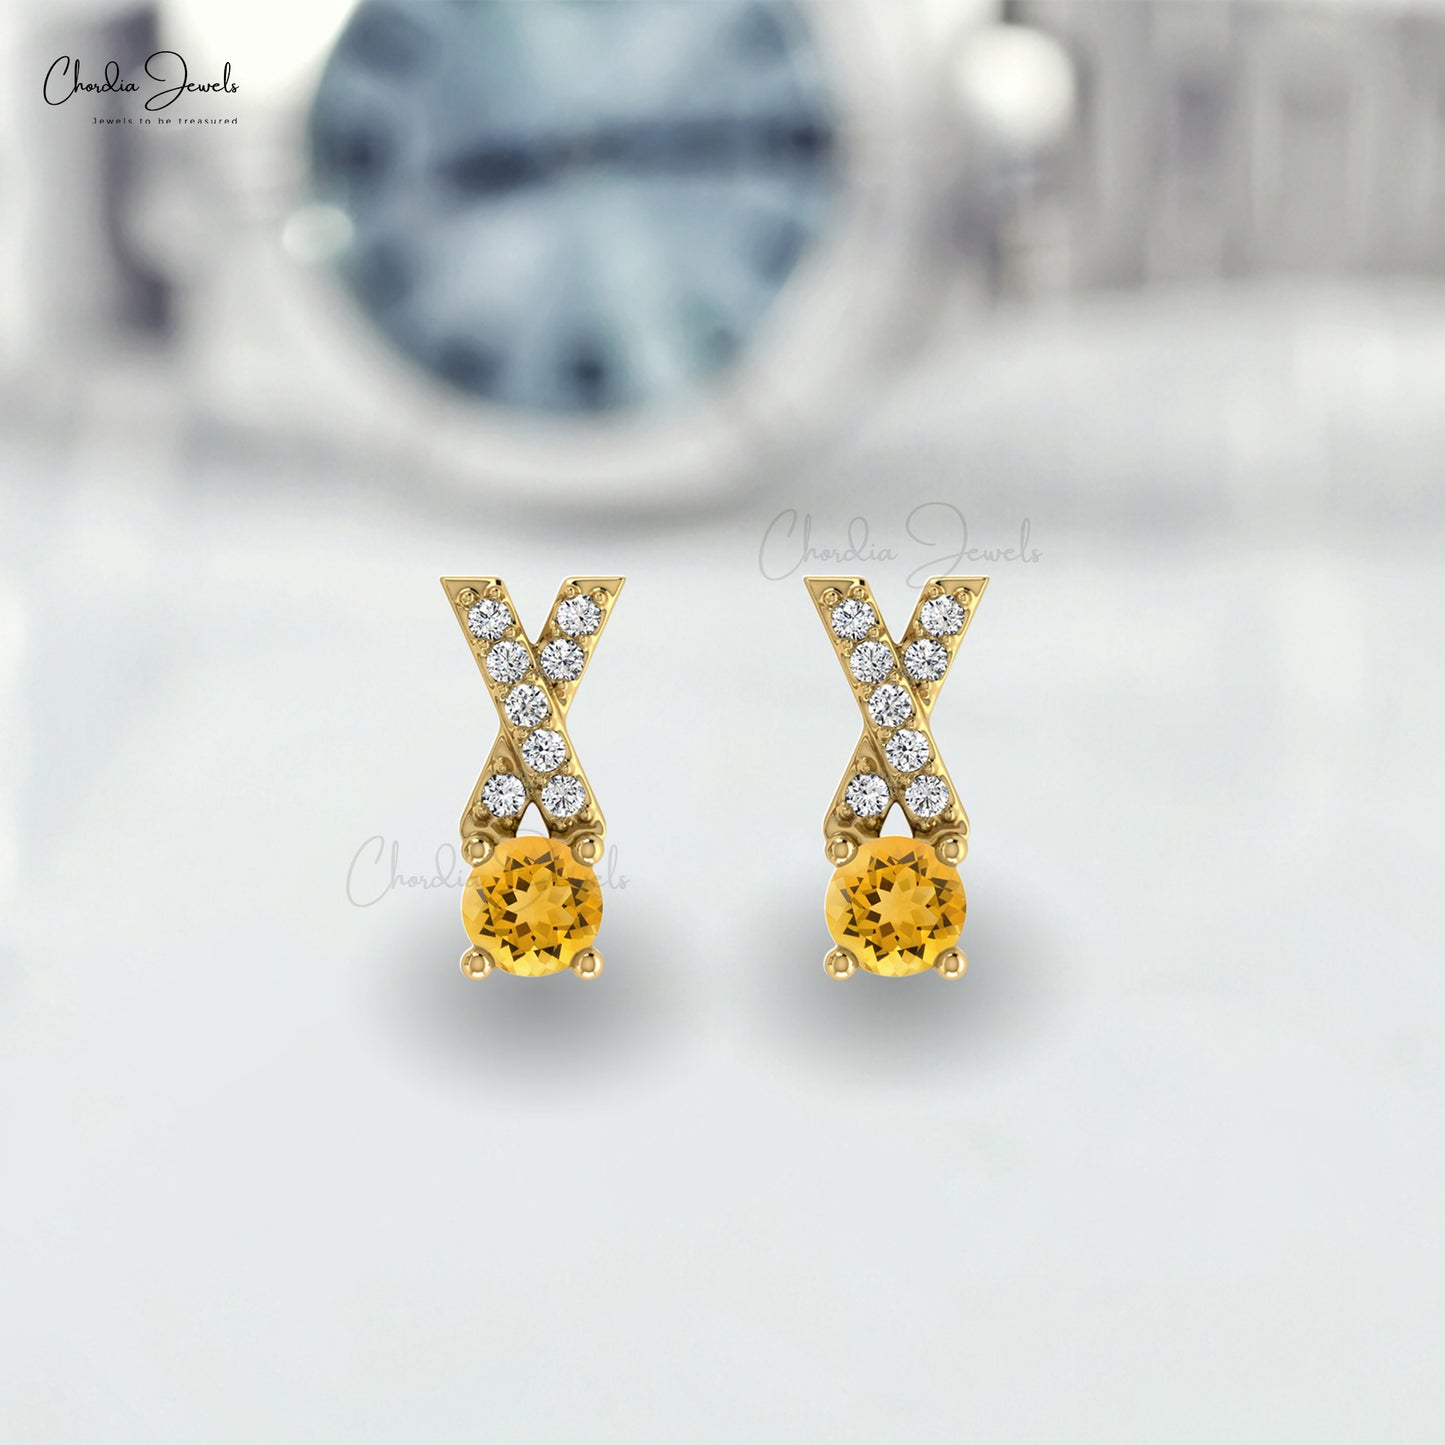 Load image into Gallery viewer, Stunning Natural Citrine Earring14k Solid Gold White Diamond Criss Cross Studs Earring 5mm Round Cut Handmade Gemstone Earrings For Women&amp;#39;s
